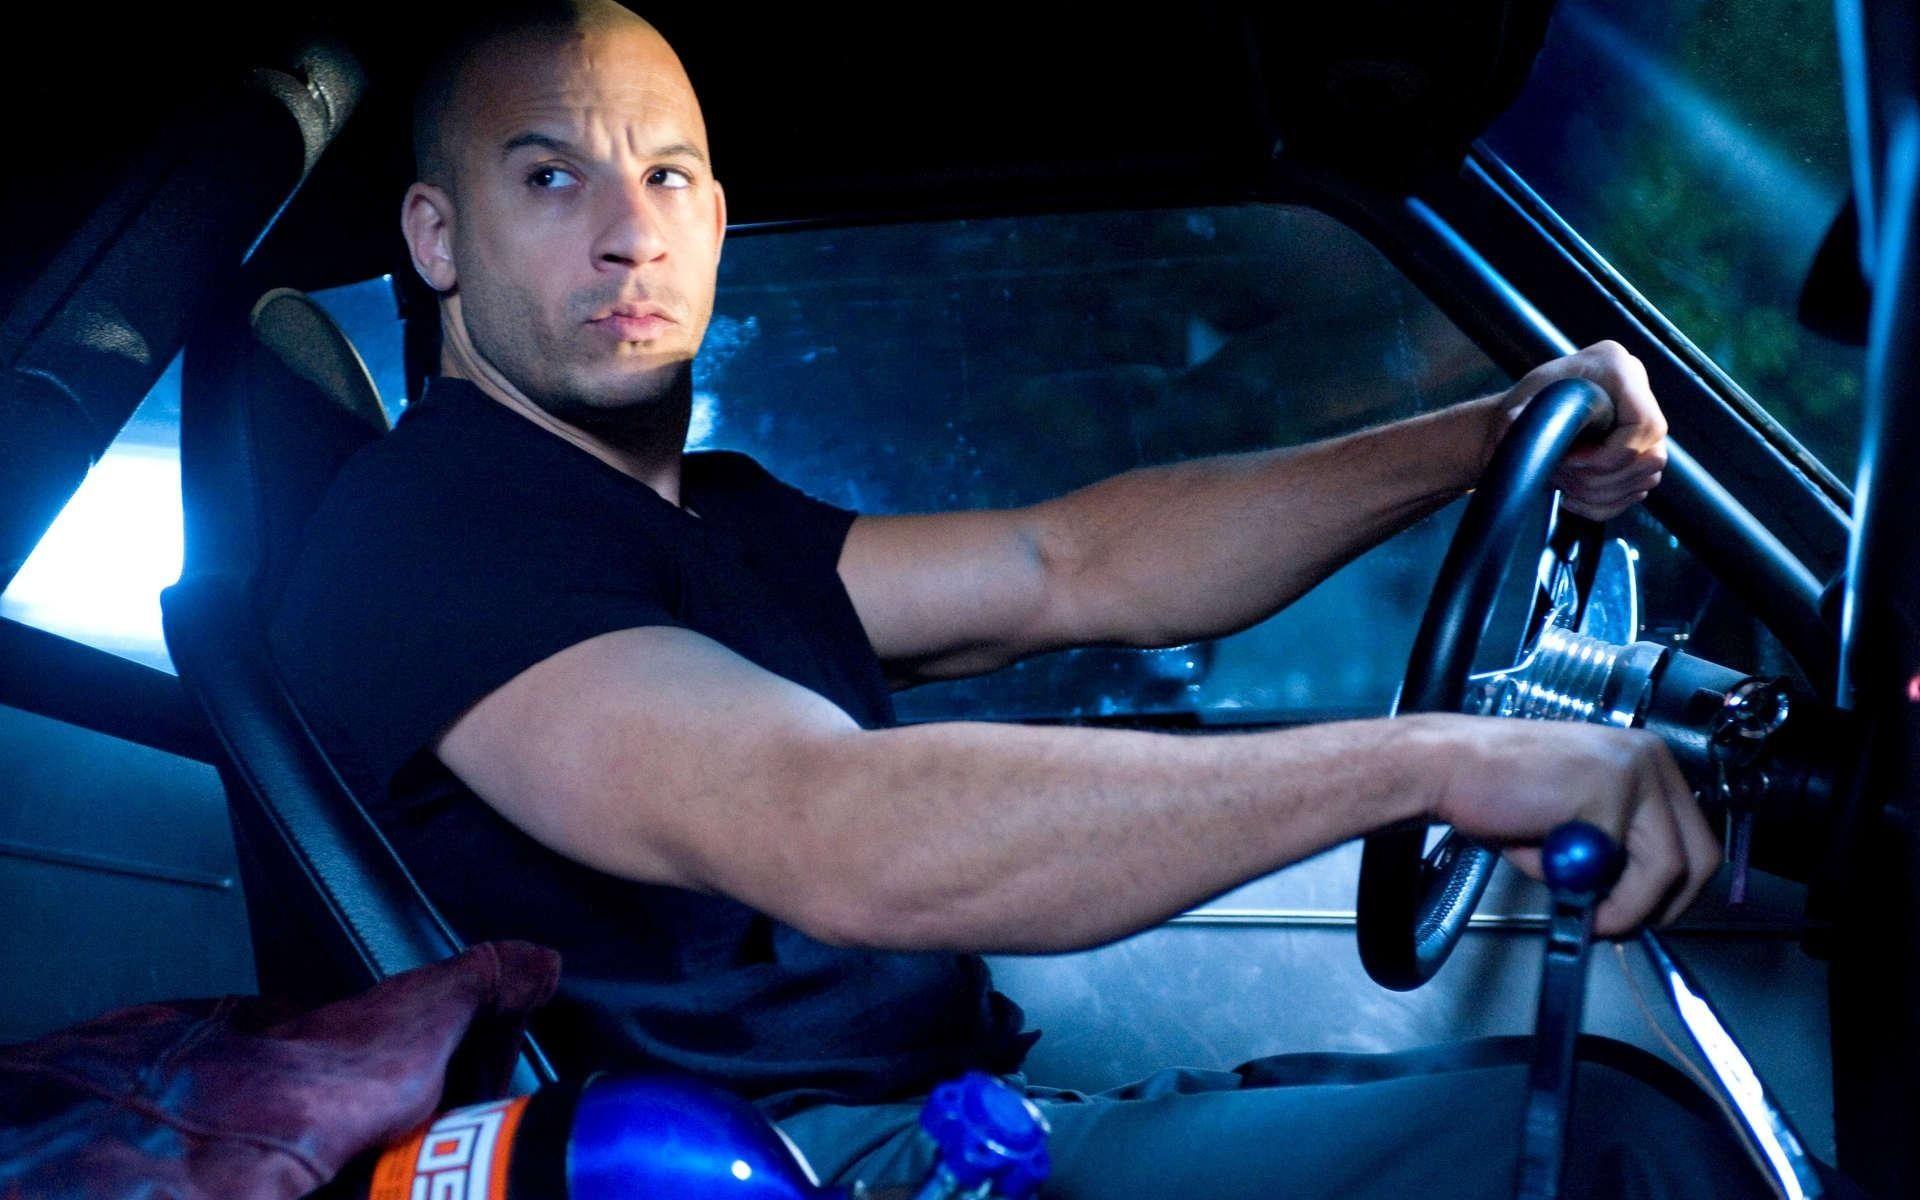 Vin Diesel in Fast and Furious HD Wallpaper. HD Background